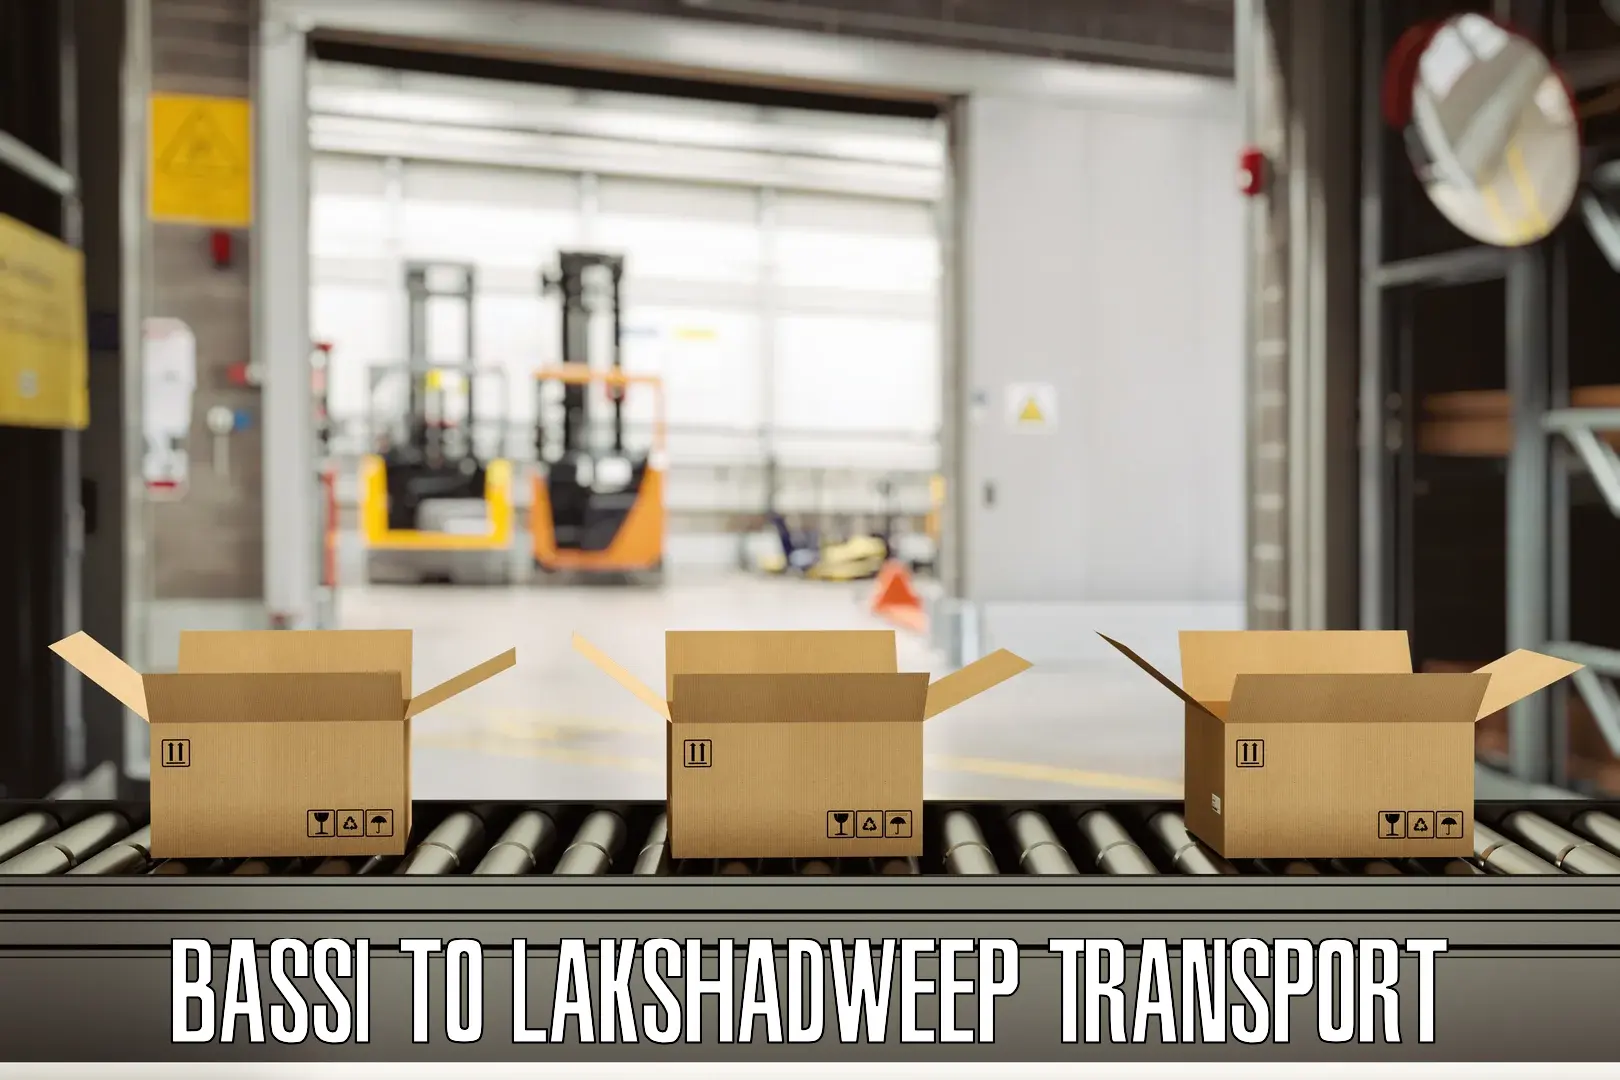 Two wheeler parcel service Bassi to Lakshadweep